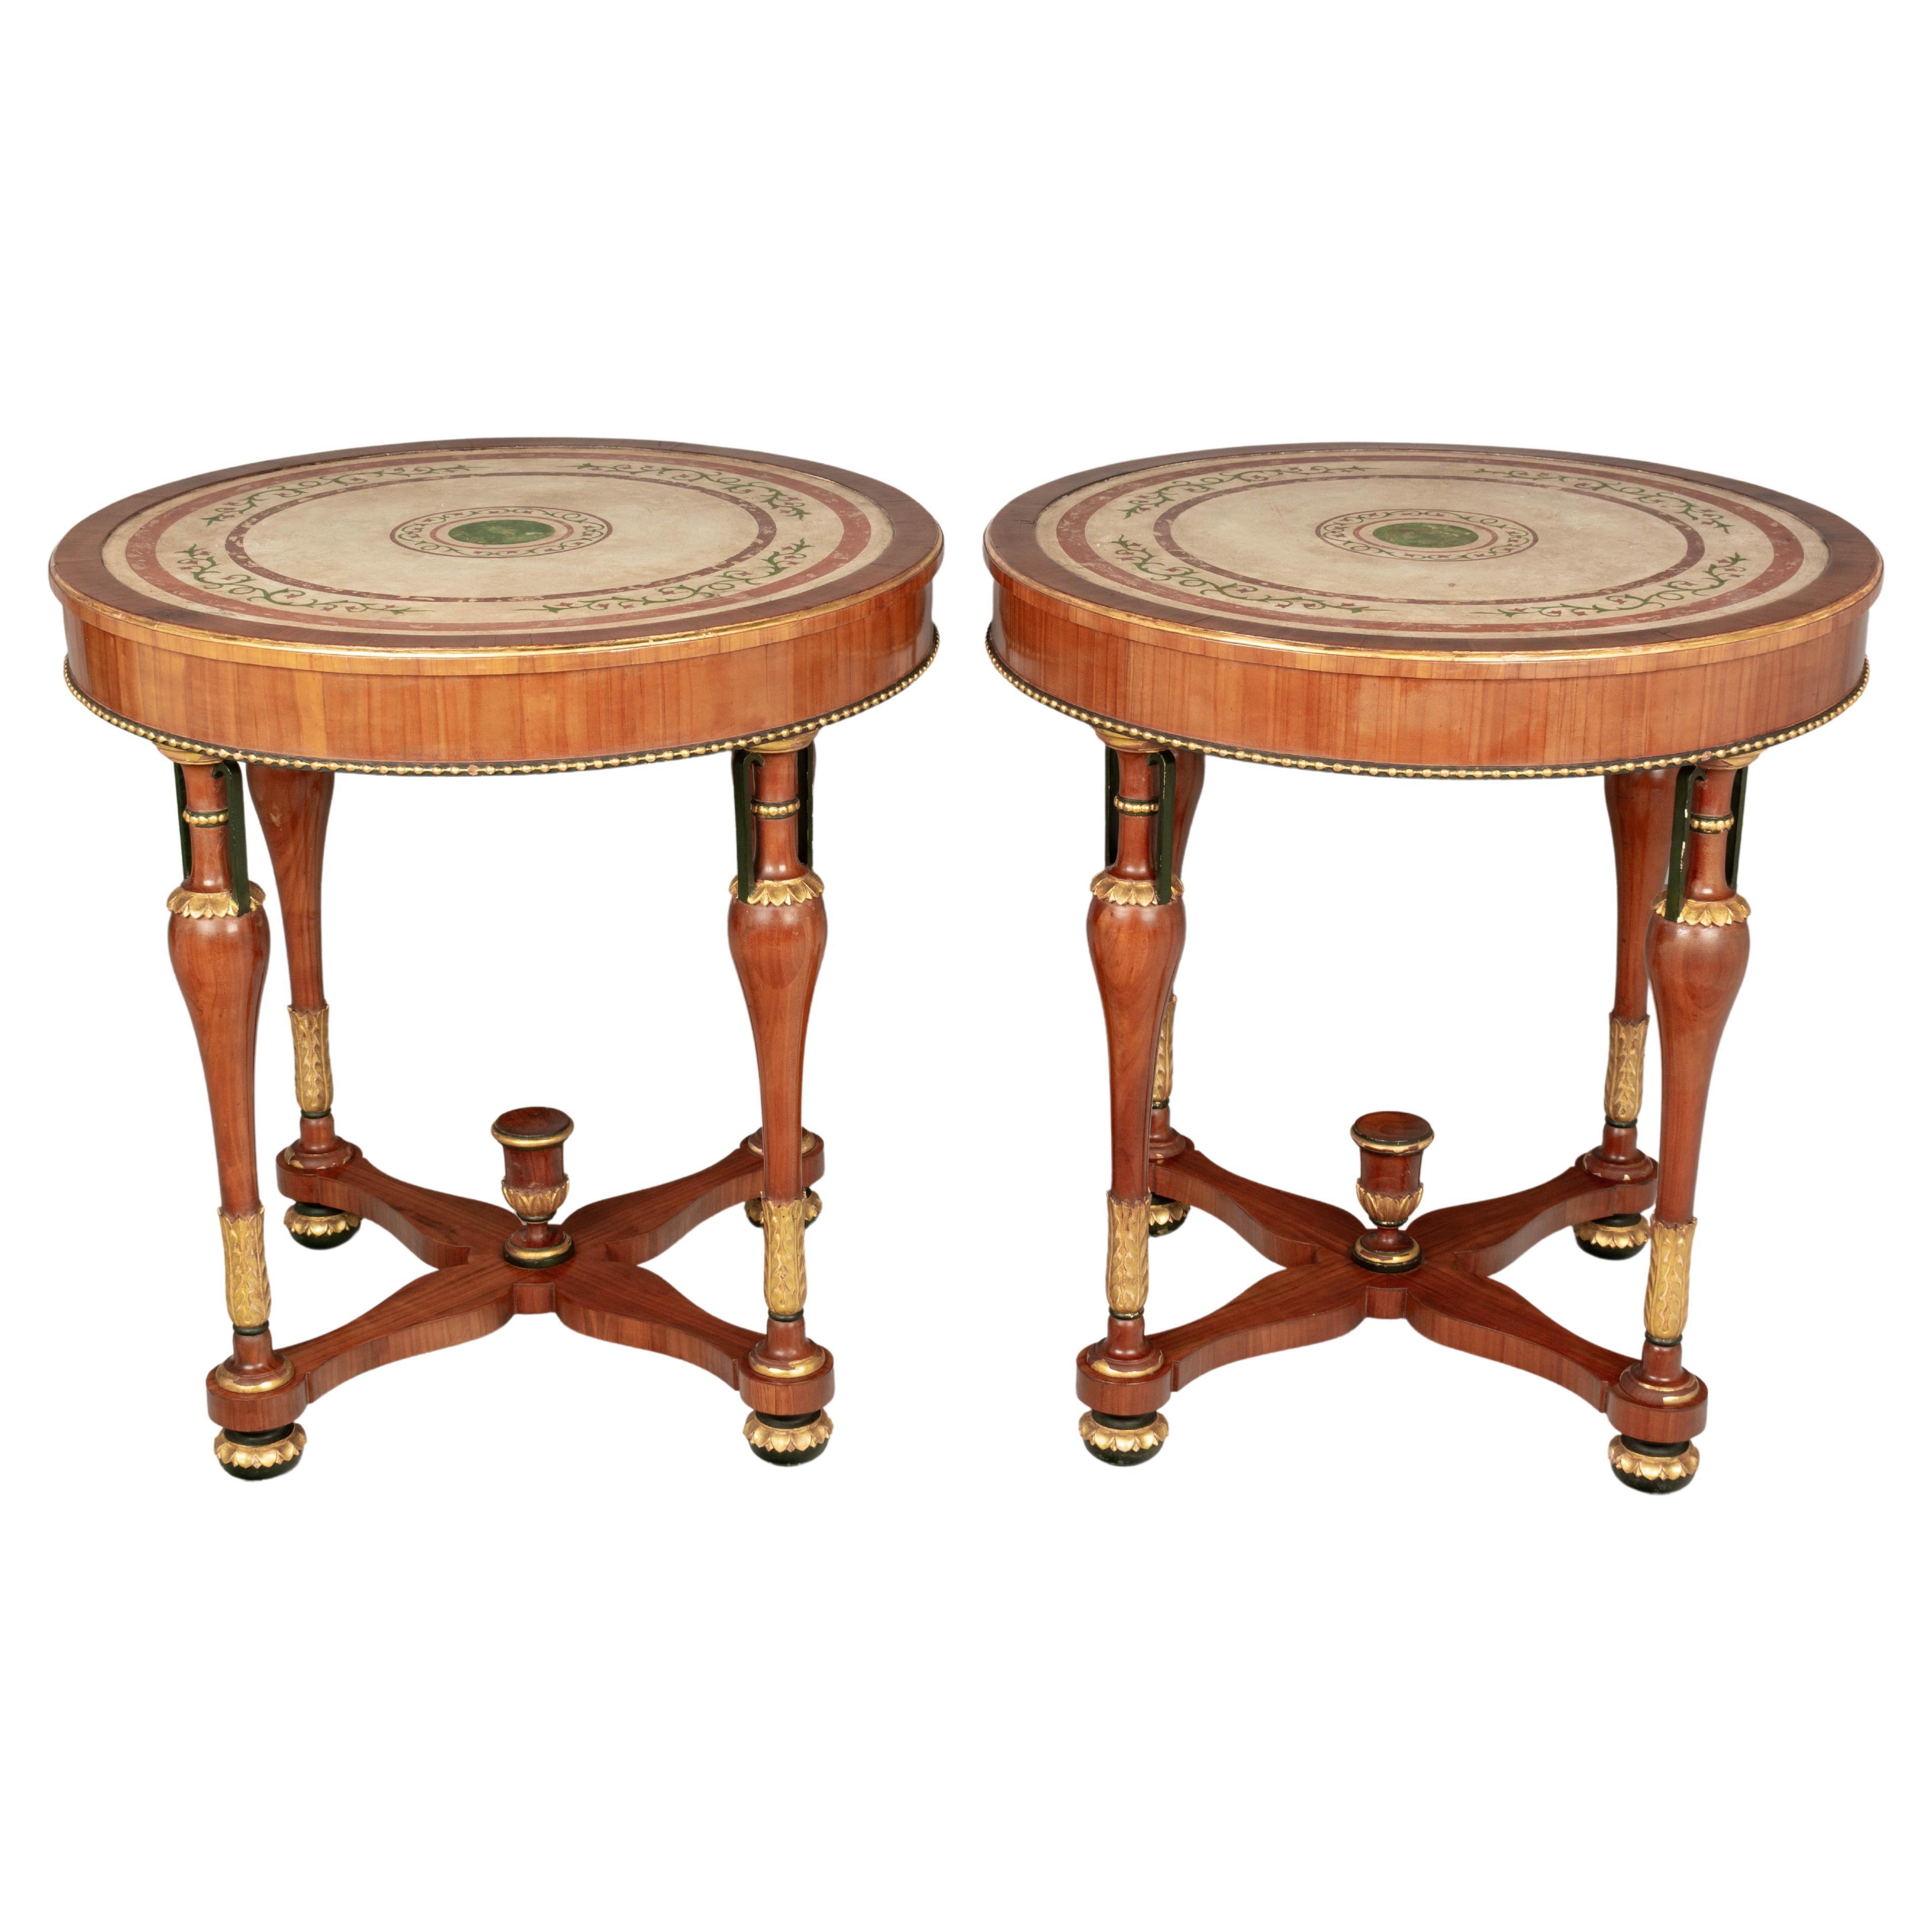 Pair of Italian Neoclassical Scagliola Top Center Tables